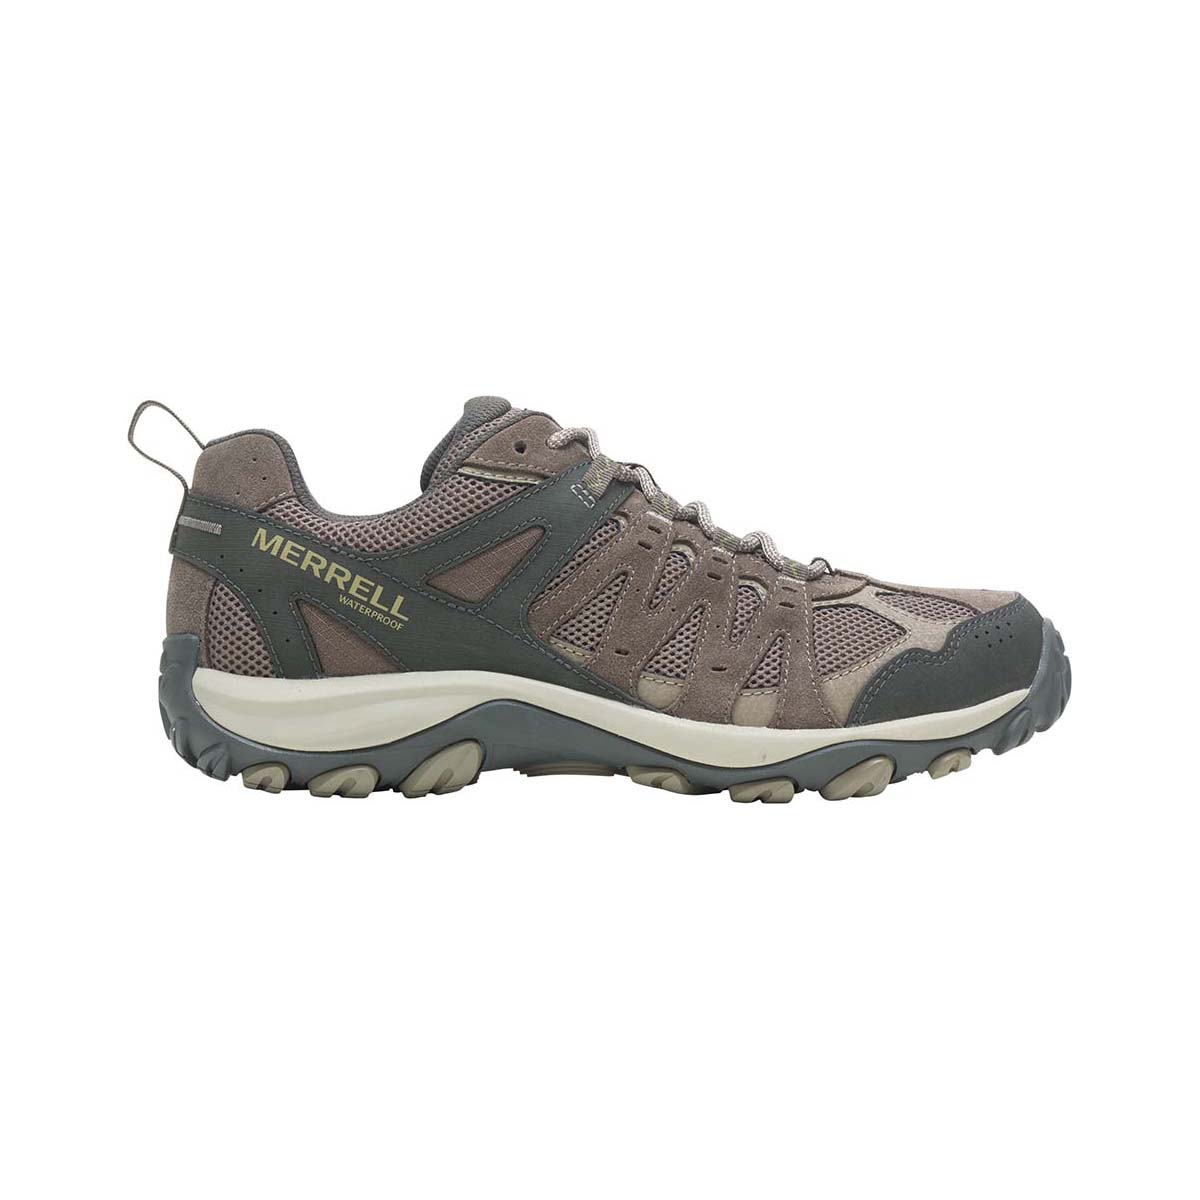 Merrell Accentor 3 Men's Low WP Hiking Boots Boulder 11